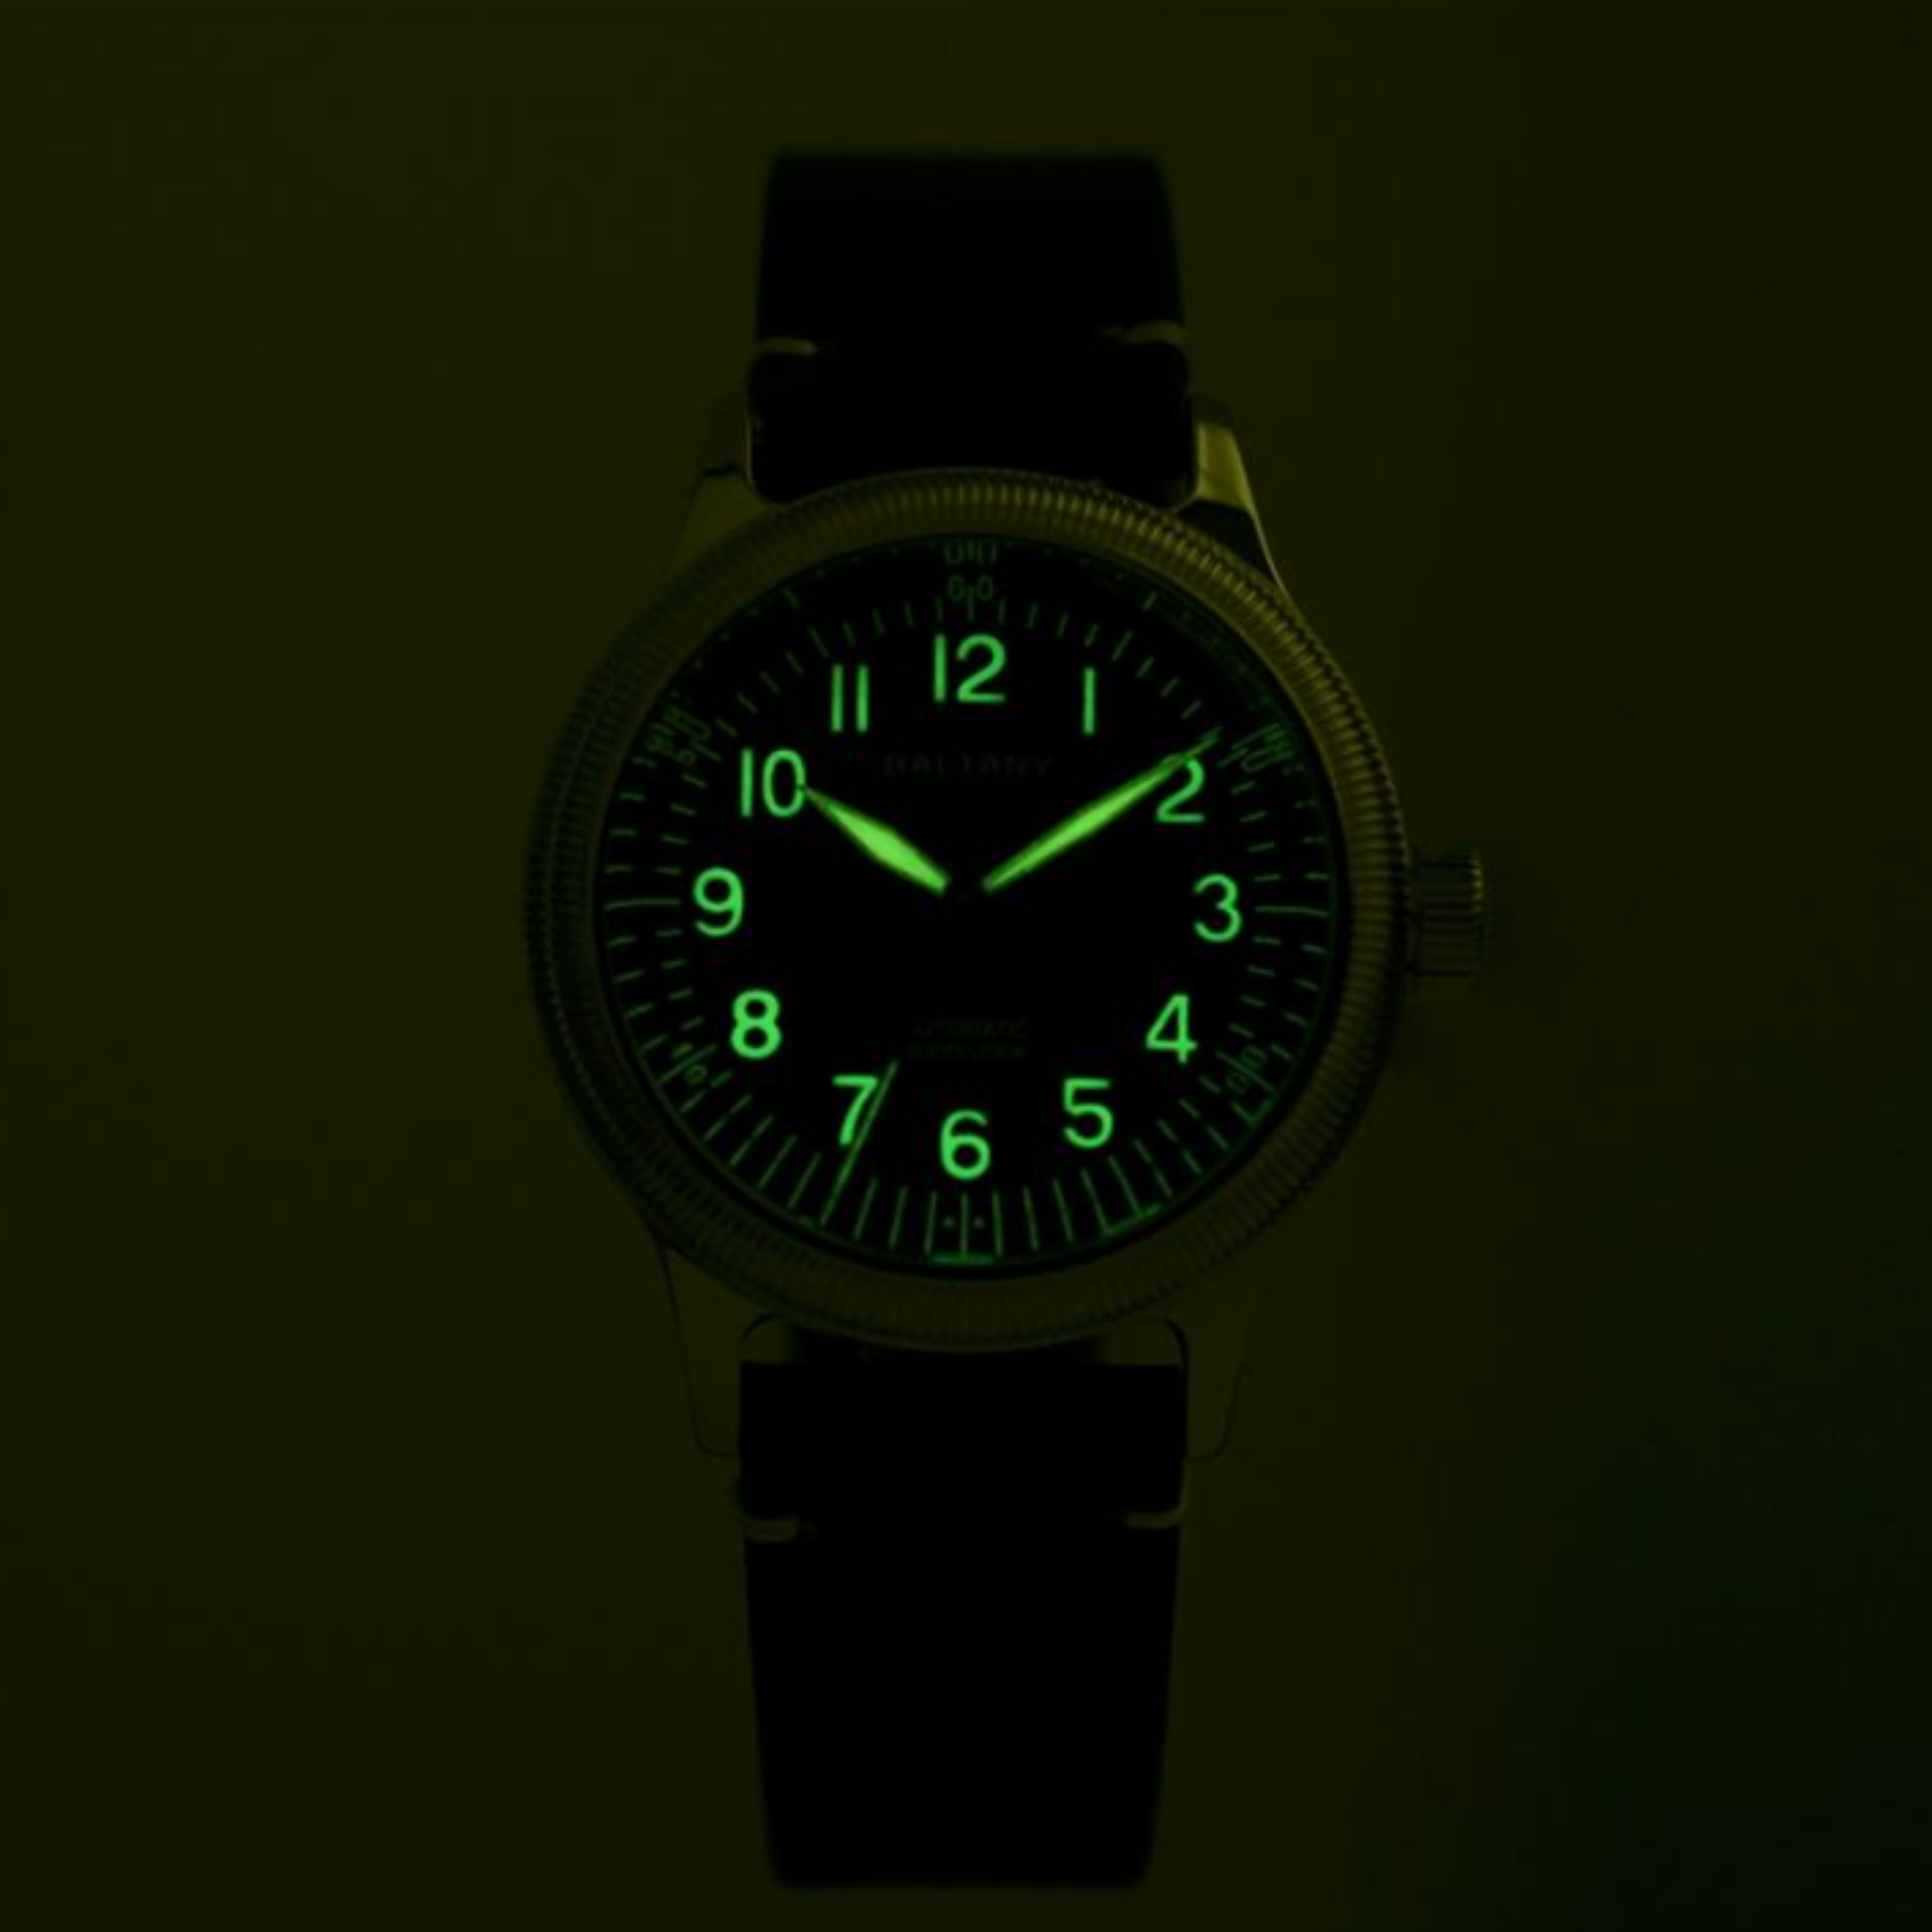 baltany mens automatic military field dress watches india dream watches